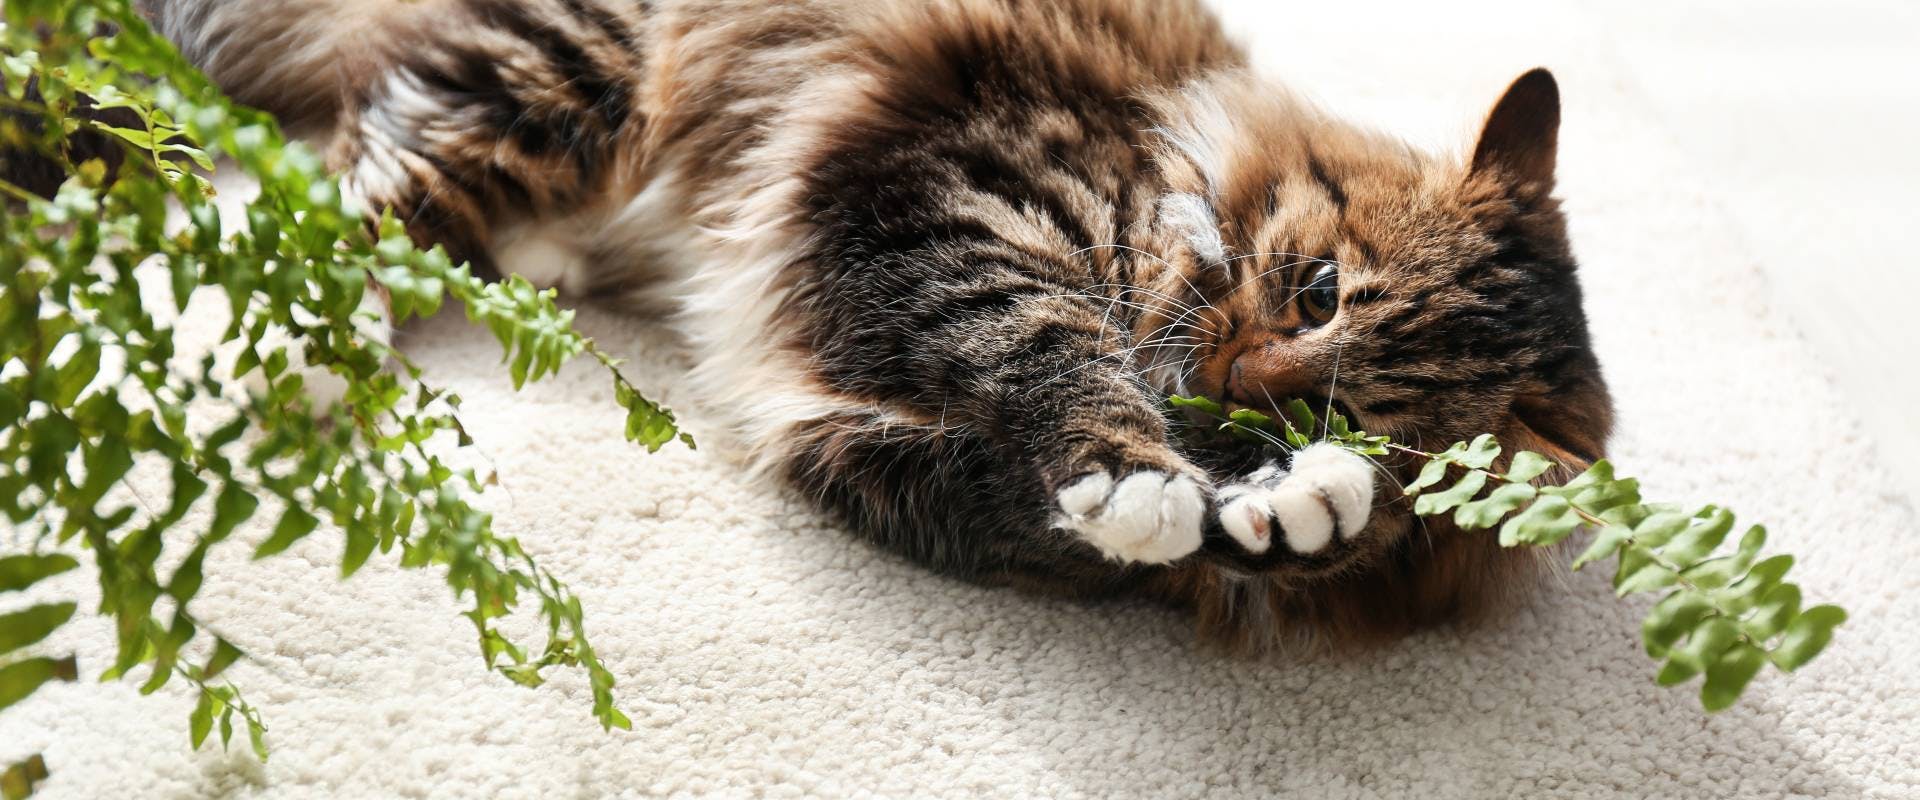 A cat playing with a fern.